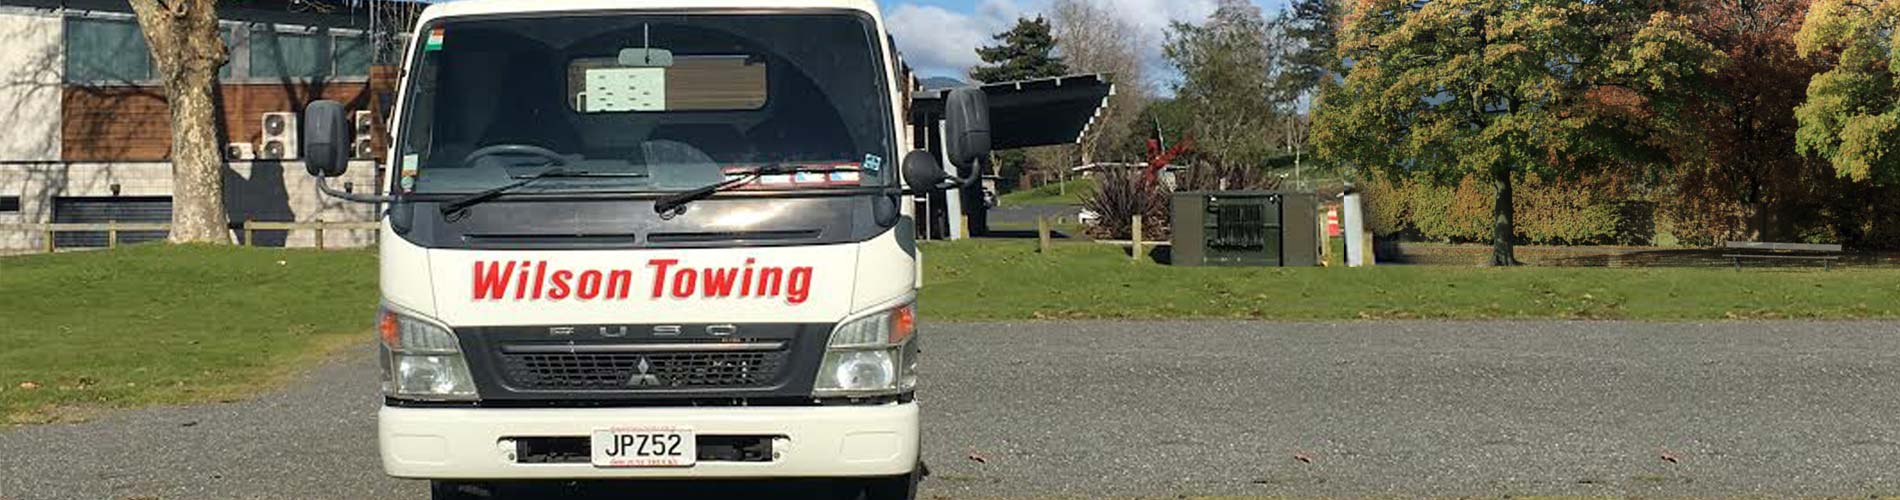 Wilson Towing offering towing services in Cambridge, Waikato